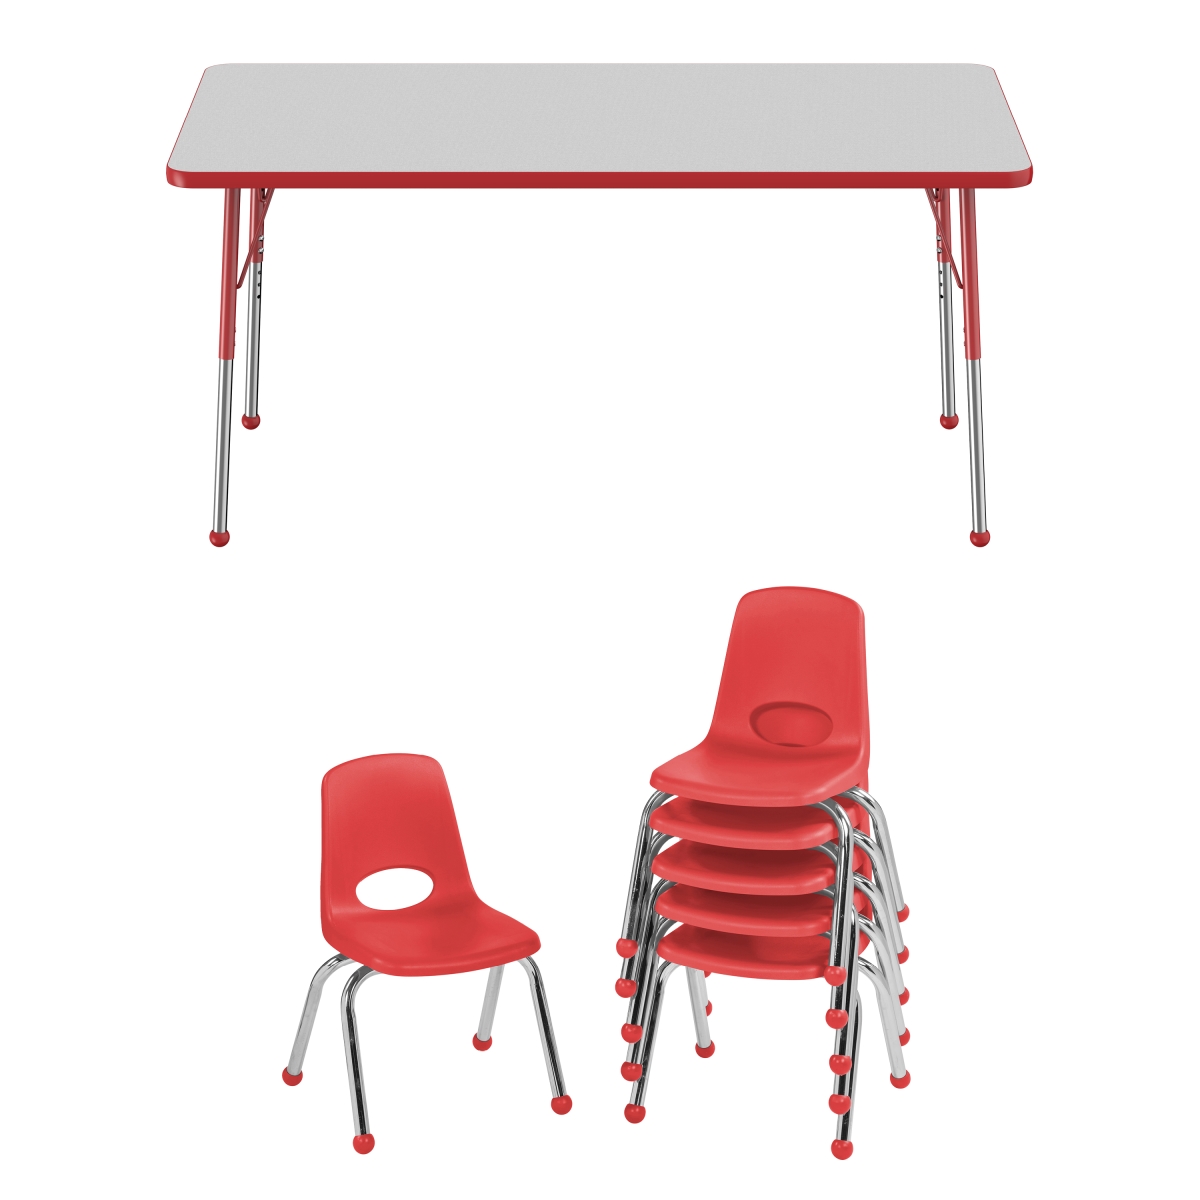 10299-gyrd 30 X 60 In. Rectangle T-mold Adjustable Activity Table Standard Ball With 6 Stack Chairs 12 In. Ball Glide - Grey & Red